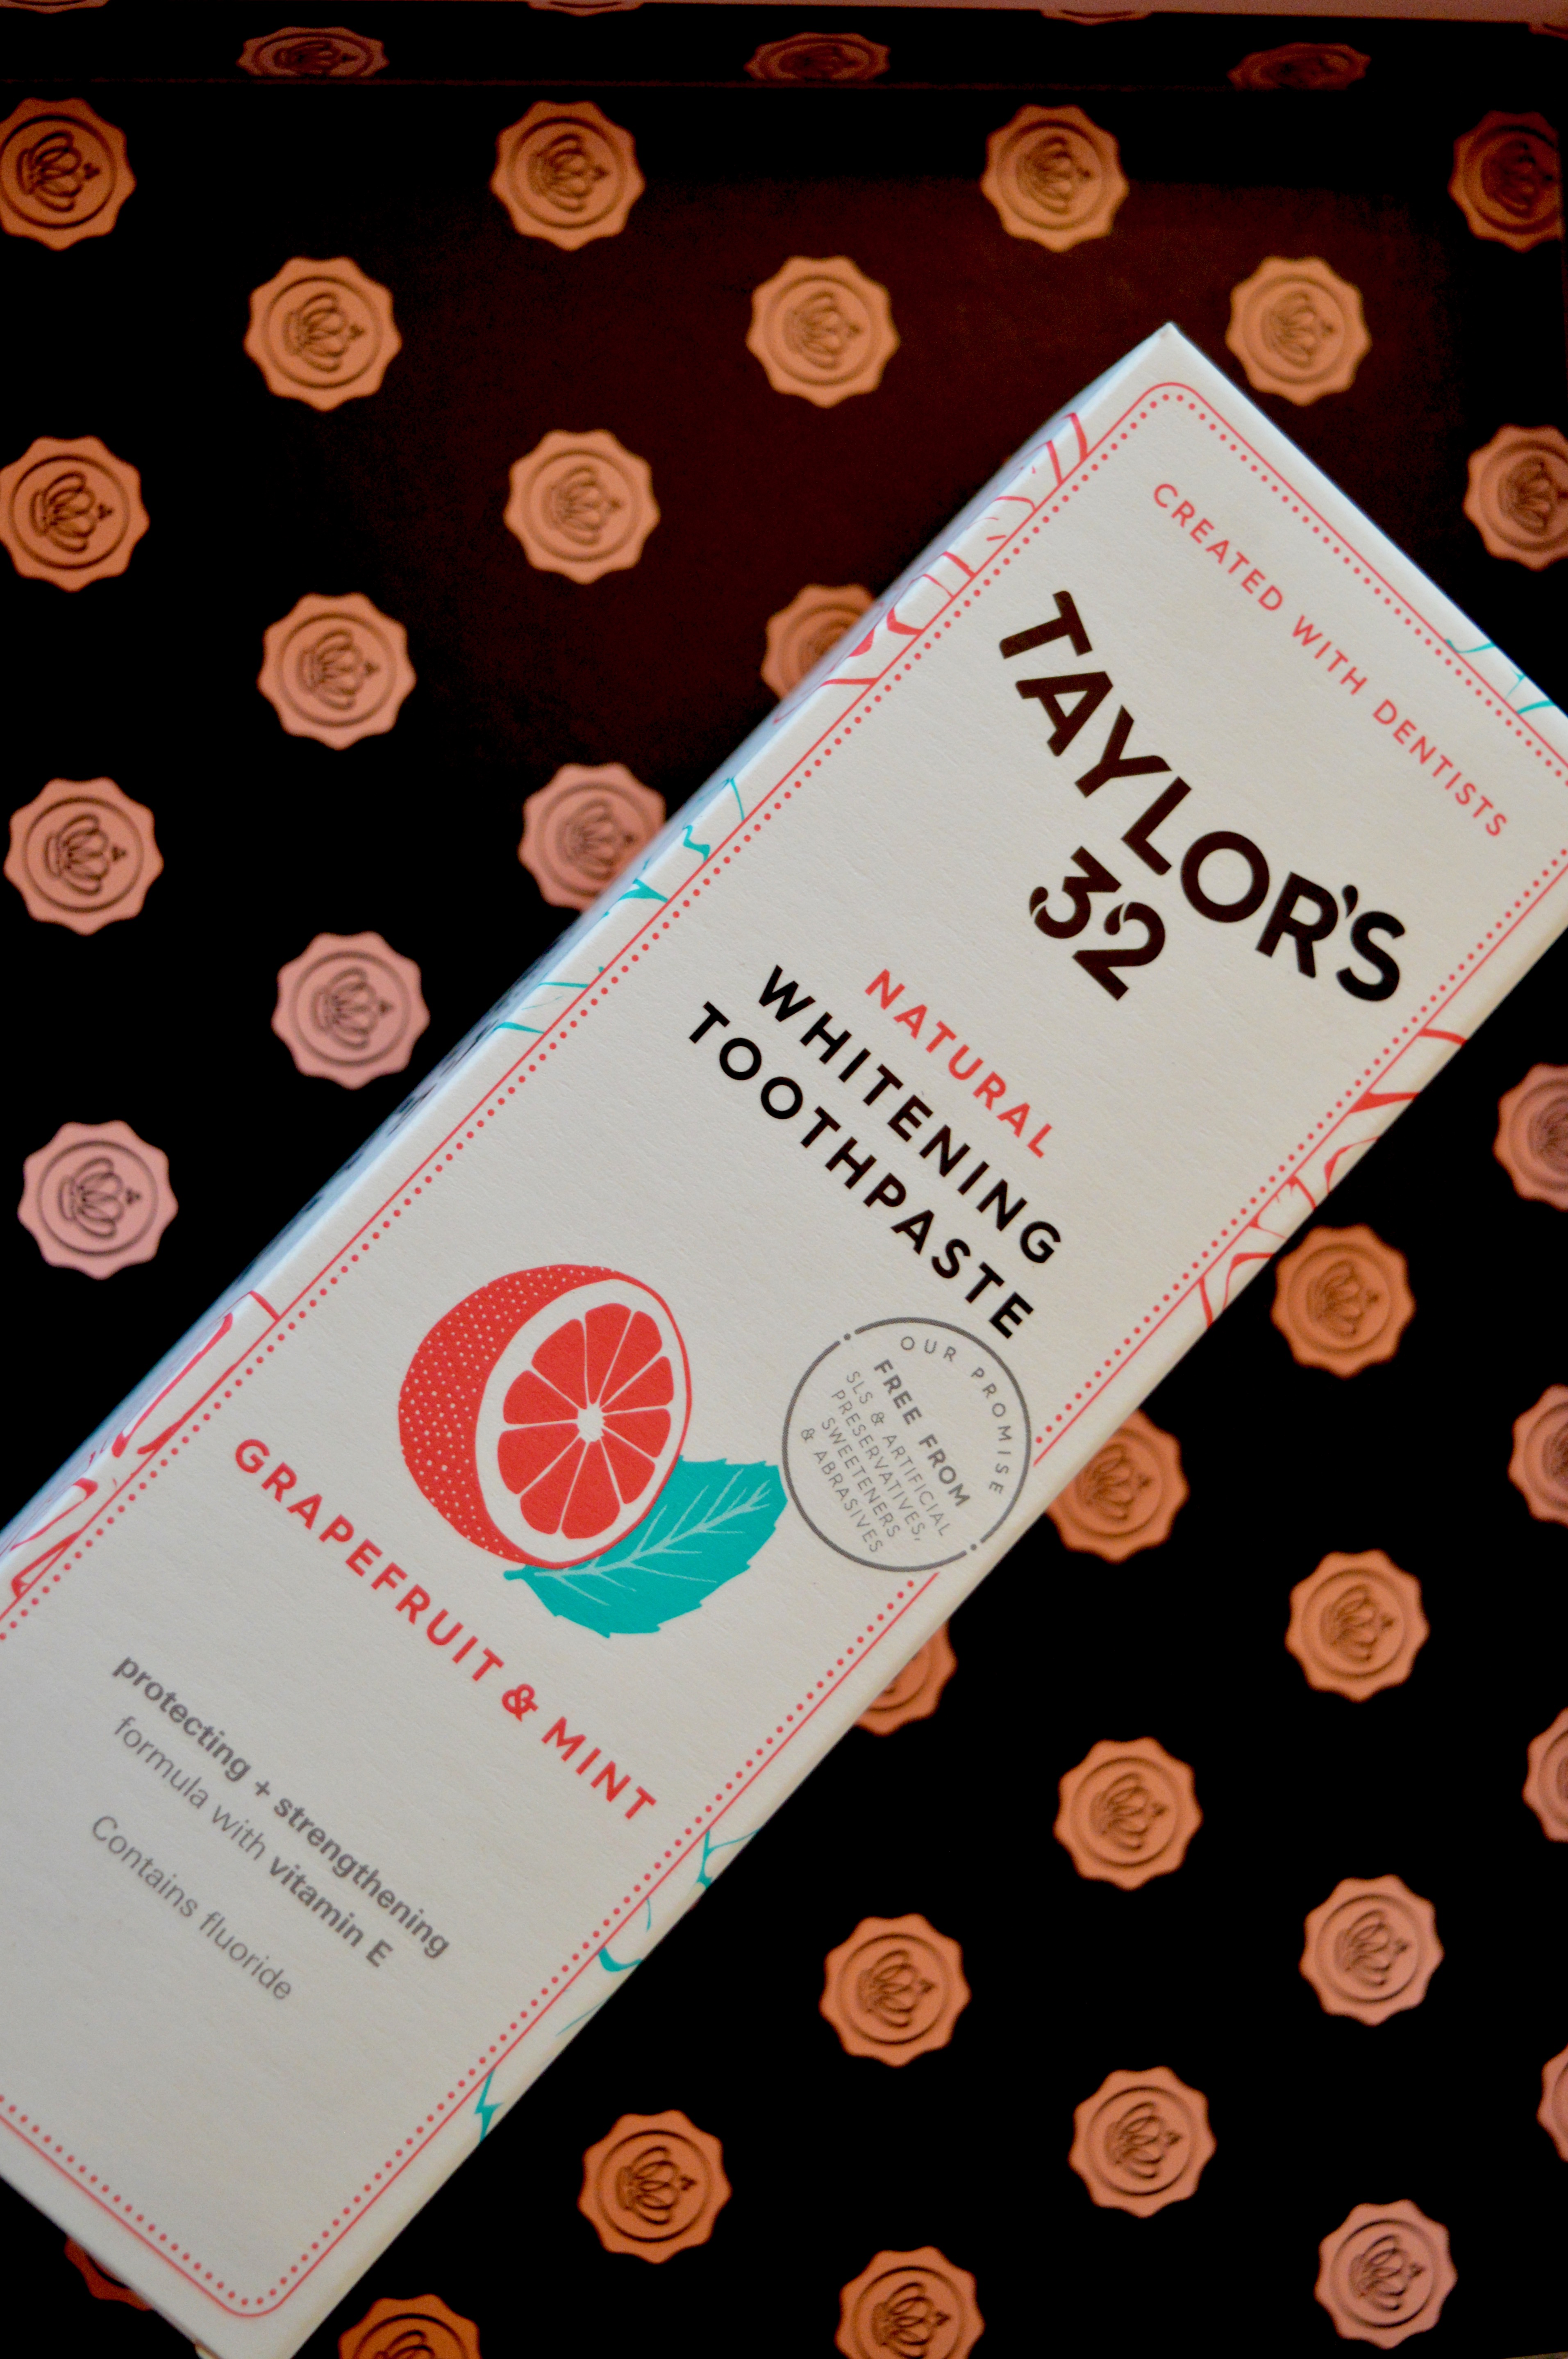 taylors-32-whitening-toothpaste-september-glossybox-beauty-subscription-box-elle-blonde-luxury-lifestyle-destination